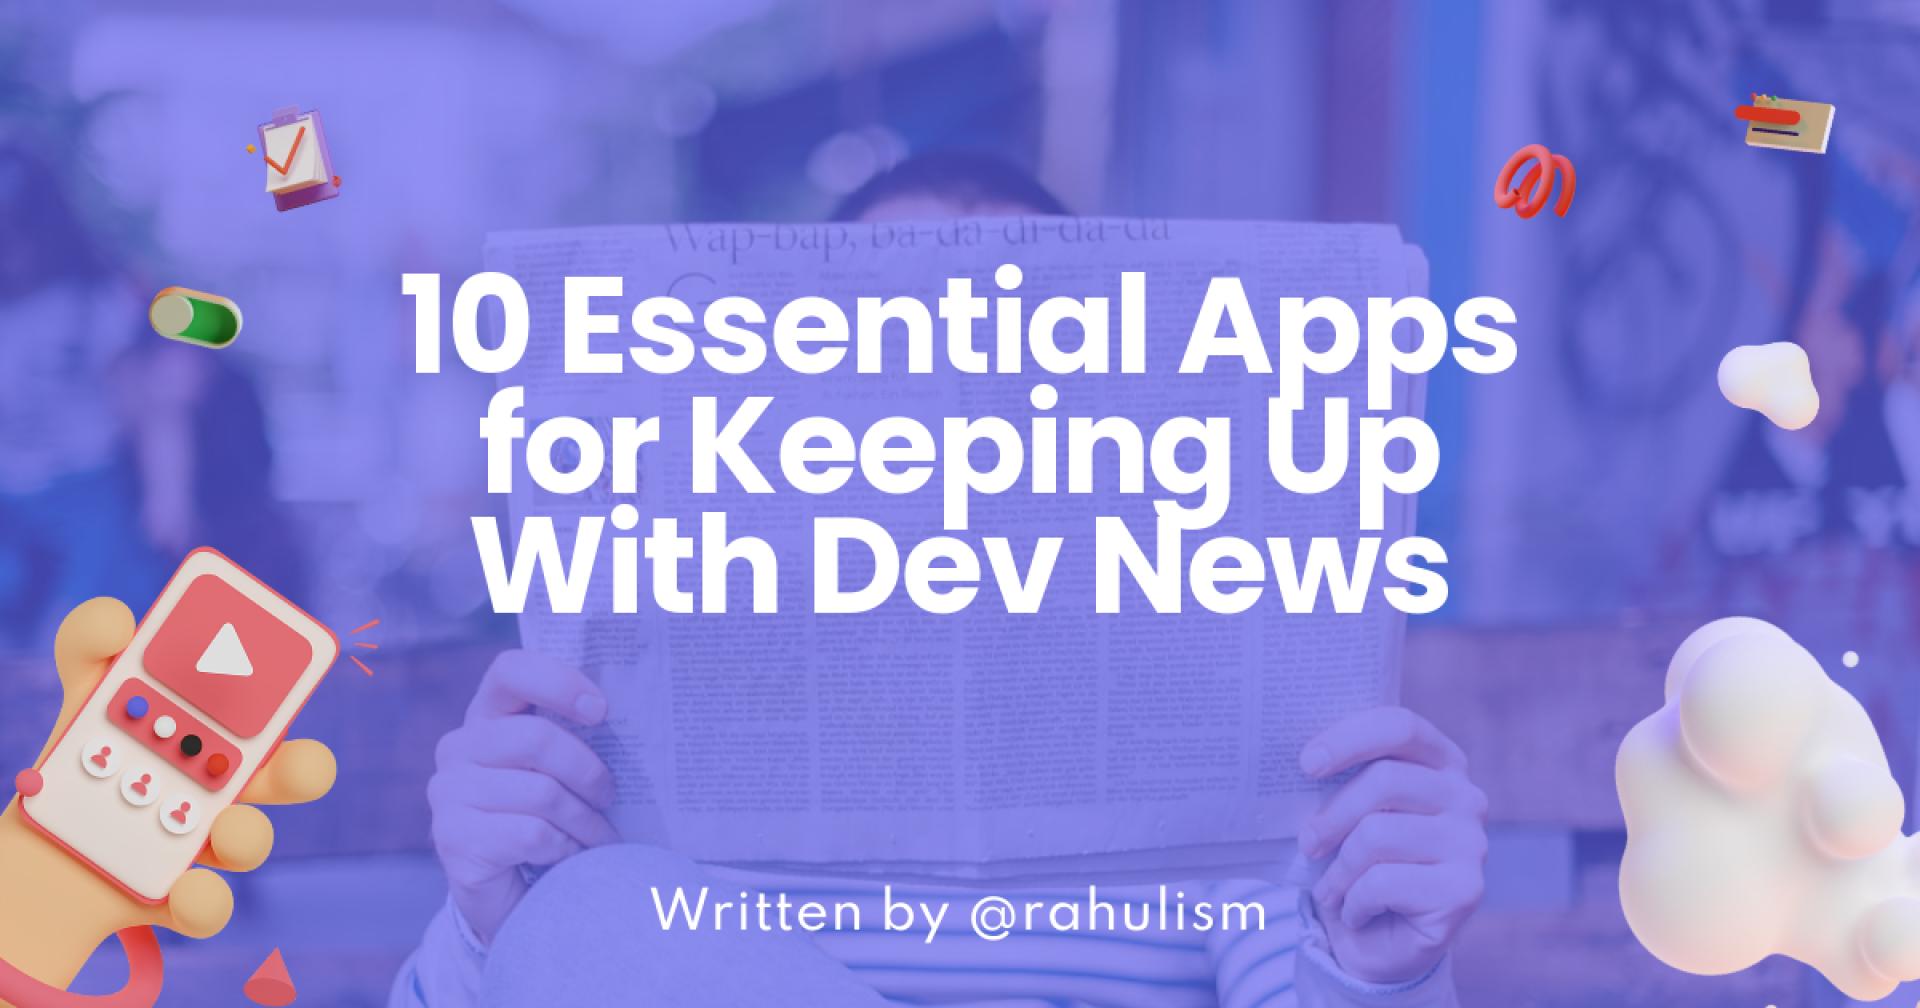 Don't Miss Out: 10 Essential Apps(and websites) for Keeping Up With Dev News